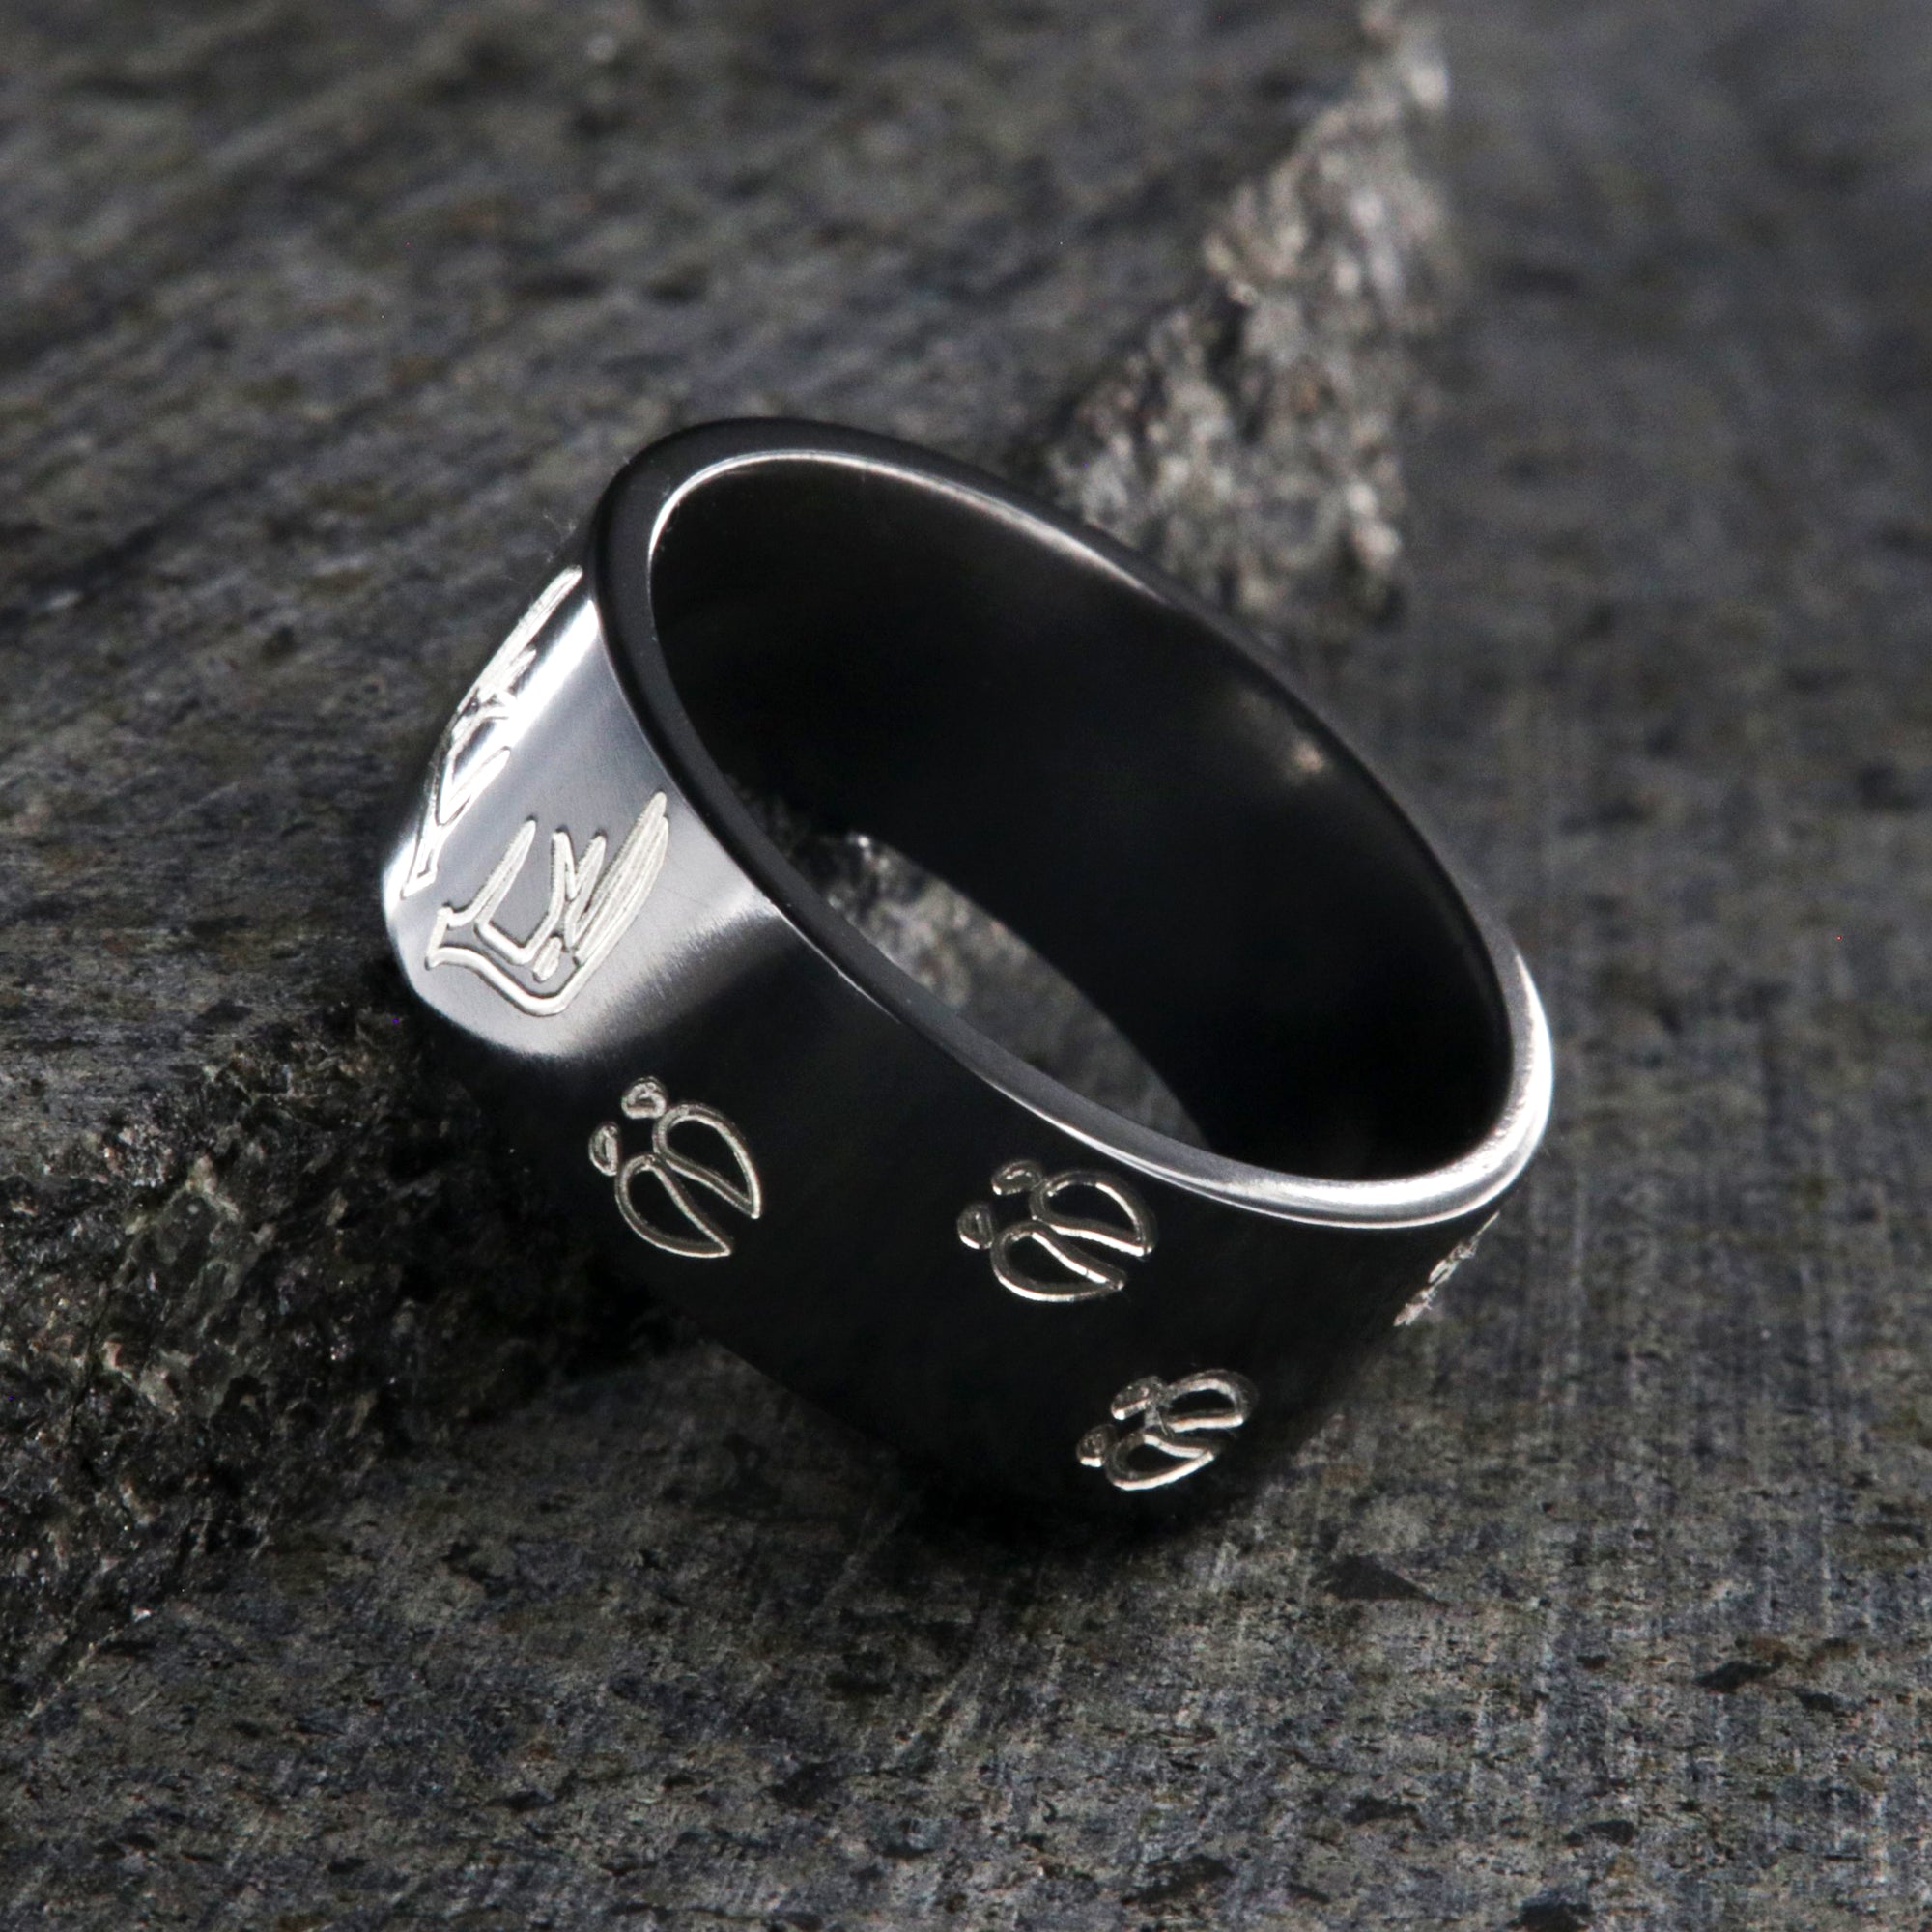 10mm wide black zirconium wedding band with a deer rack and tracks and a flat profile